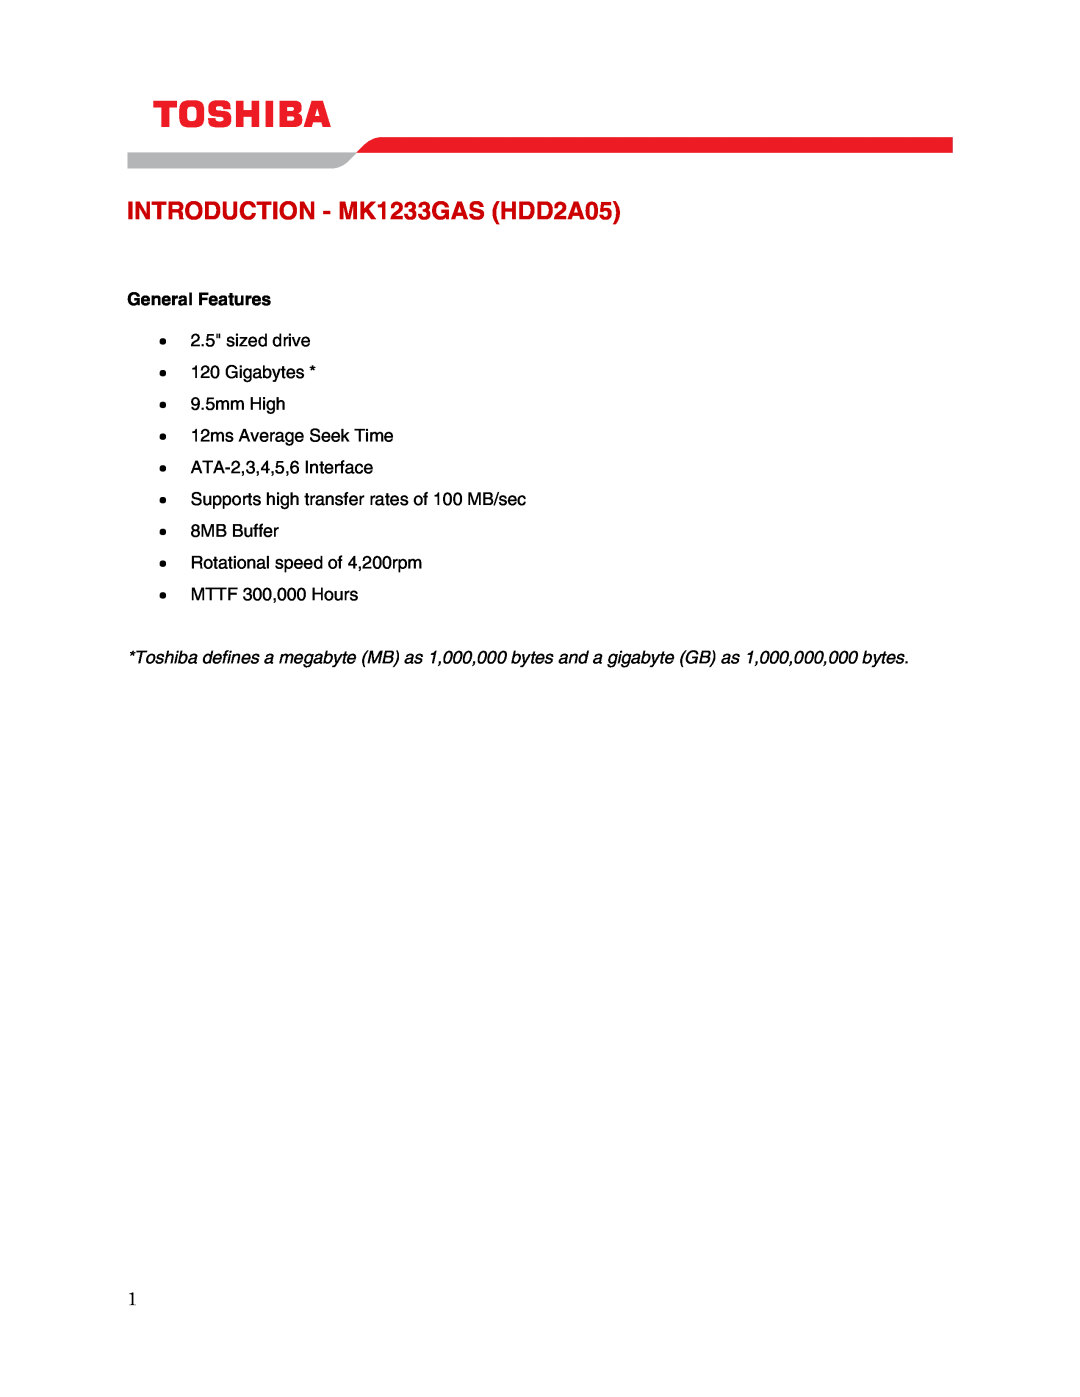 Toshiba user manual INTRODUCTION - MK1233GAS HDD2A05, General Features 